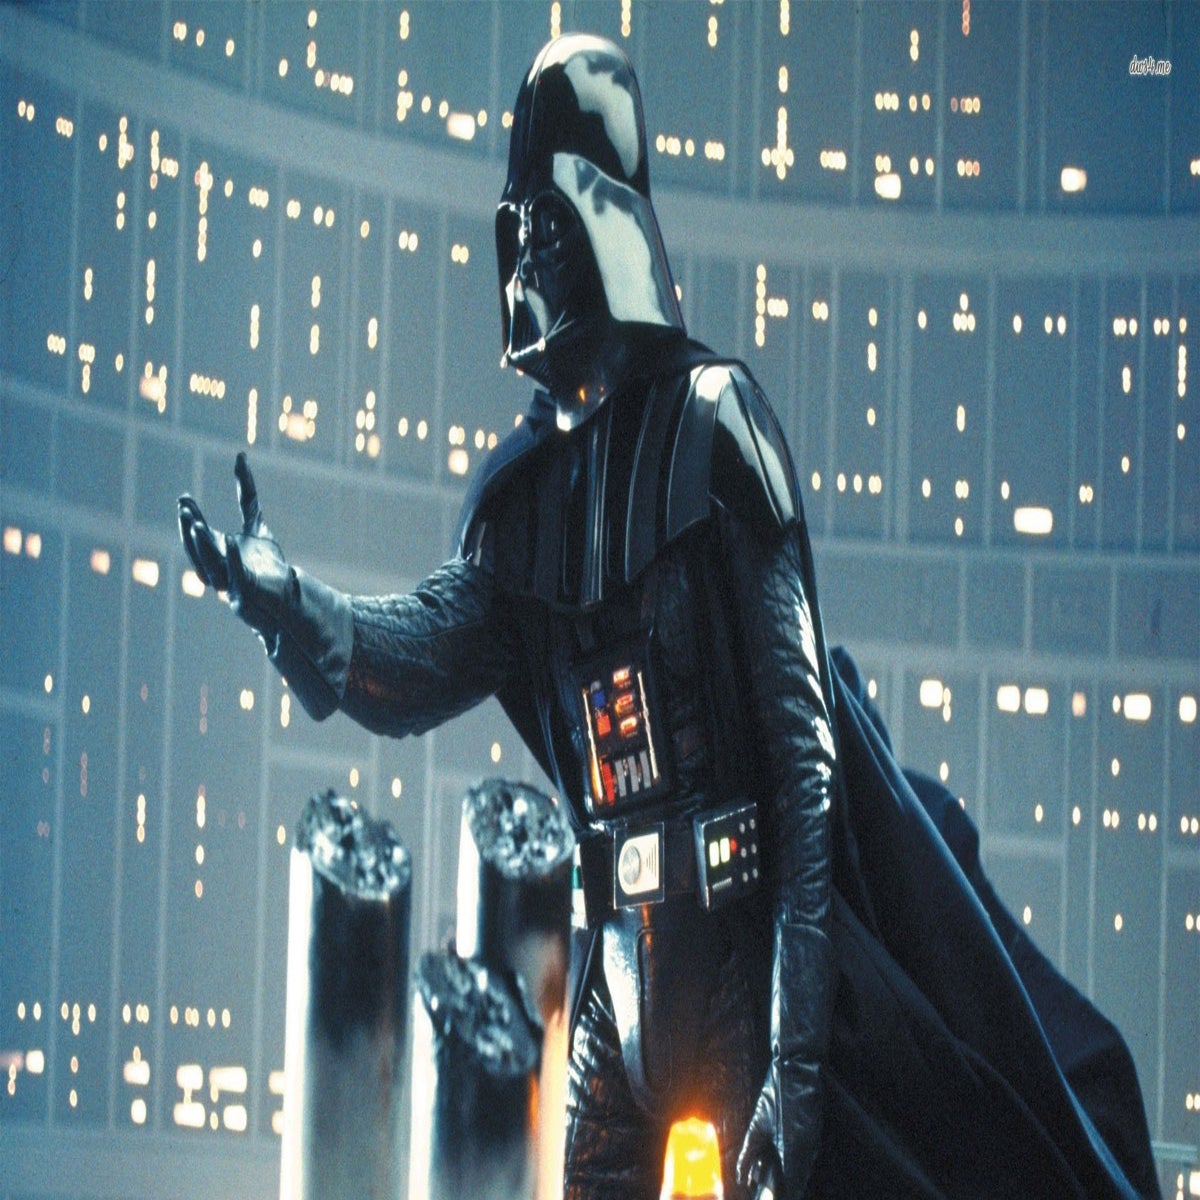 https://static.independent.co.uk/s3fs-public/thumbnails/image/2016/01/15/12/darth-vader.jpeg?width=1200&height=1200&fit=crop